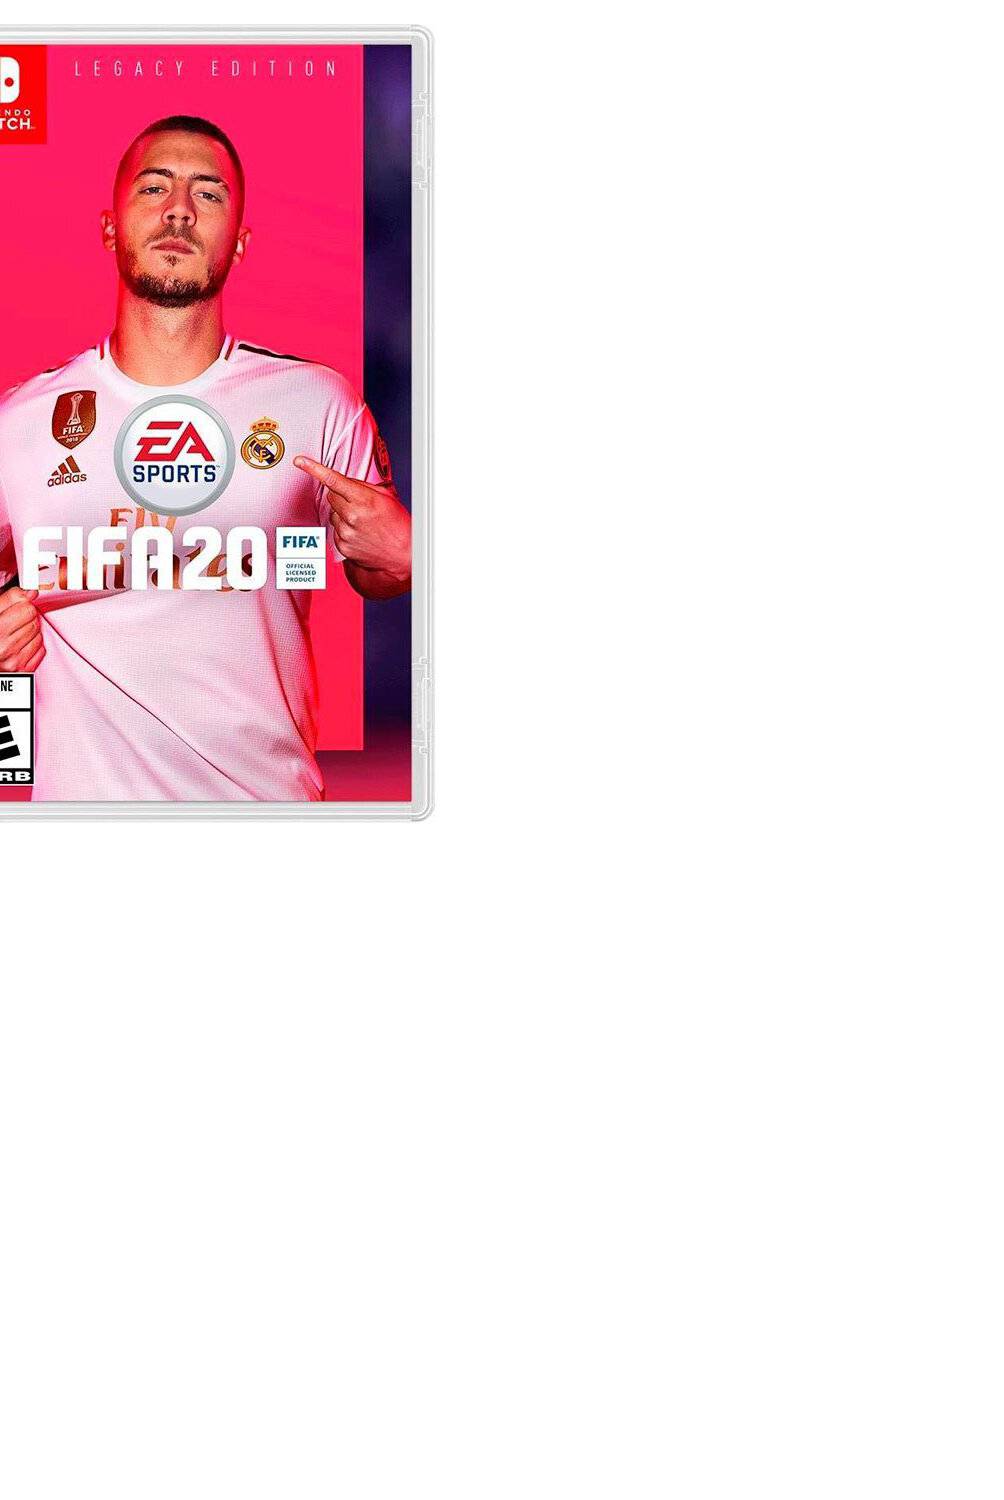 ELECTRONIC ARTS - Fifa 20 Legacy Edition Switch